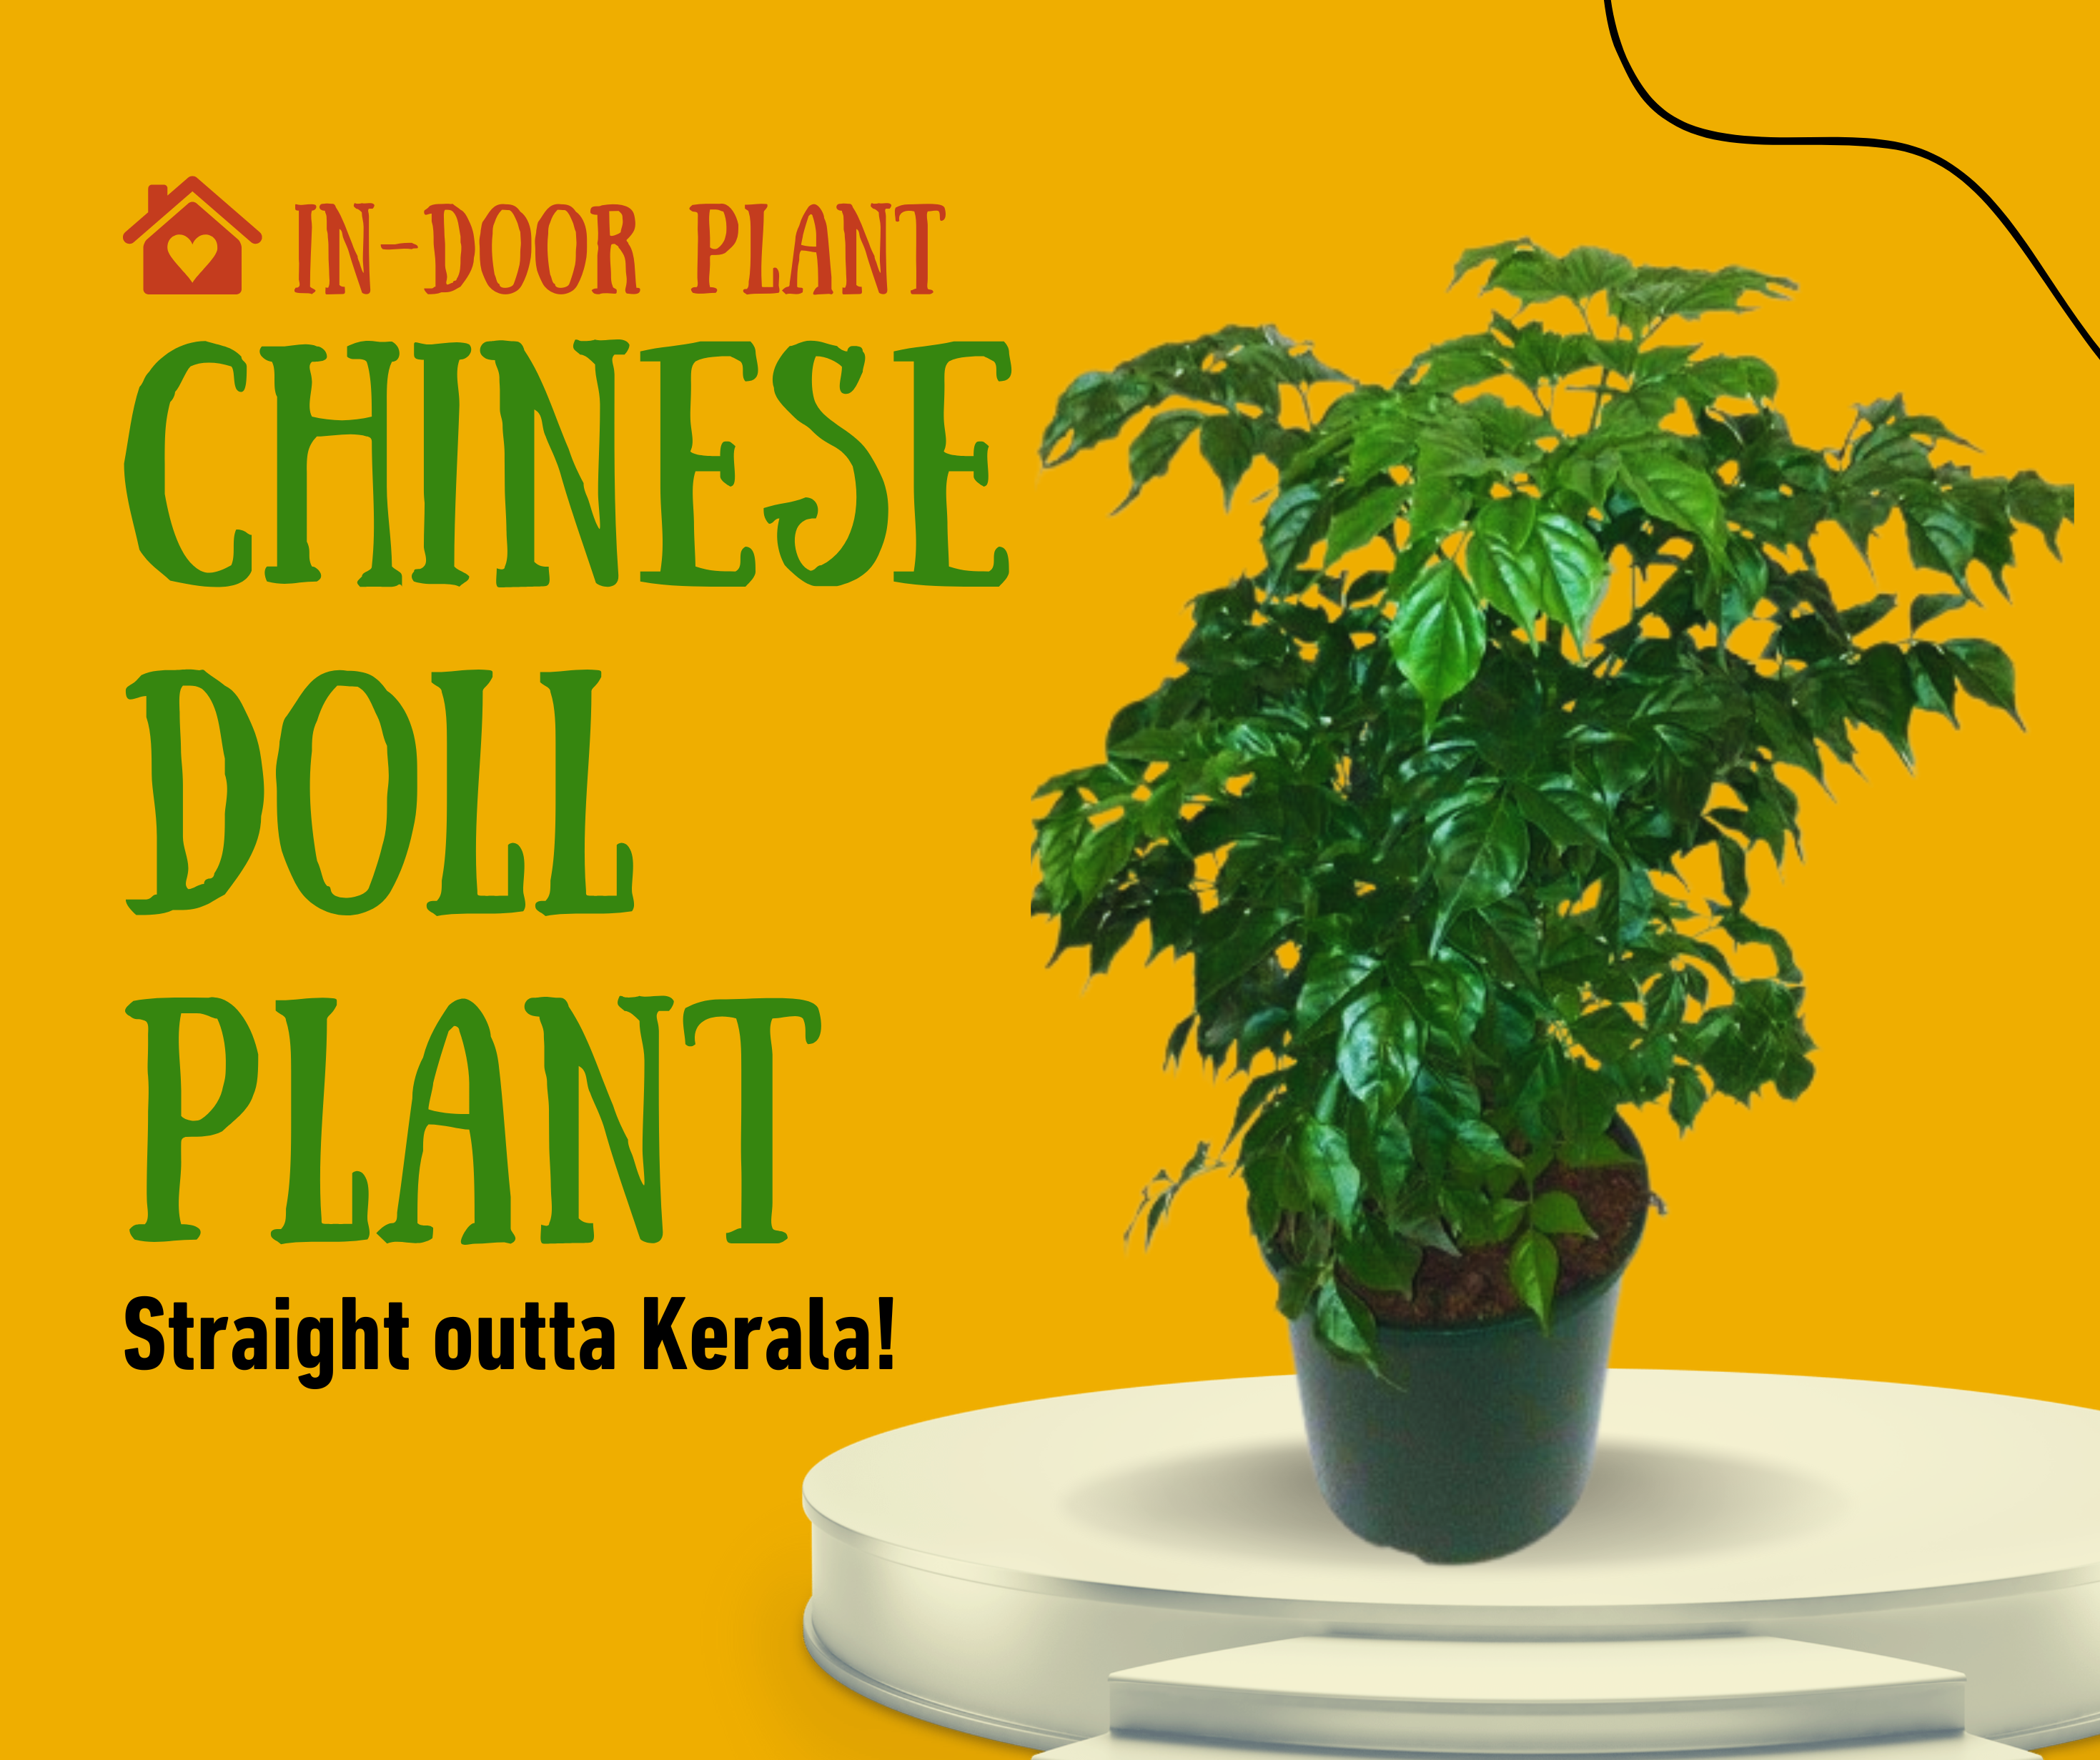 Chineese Doll Plant